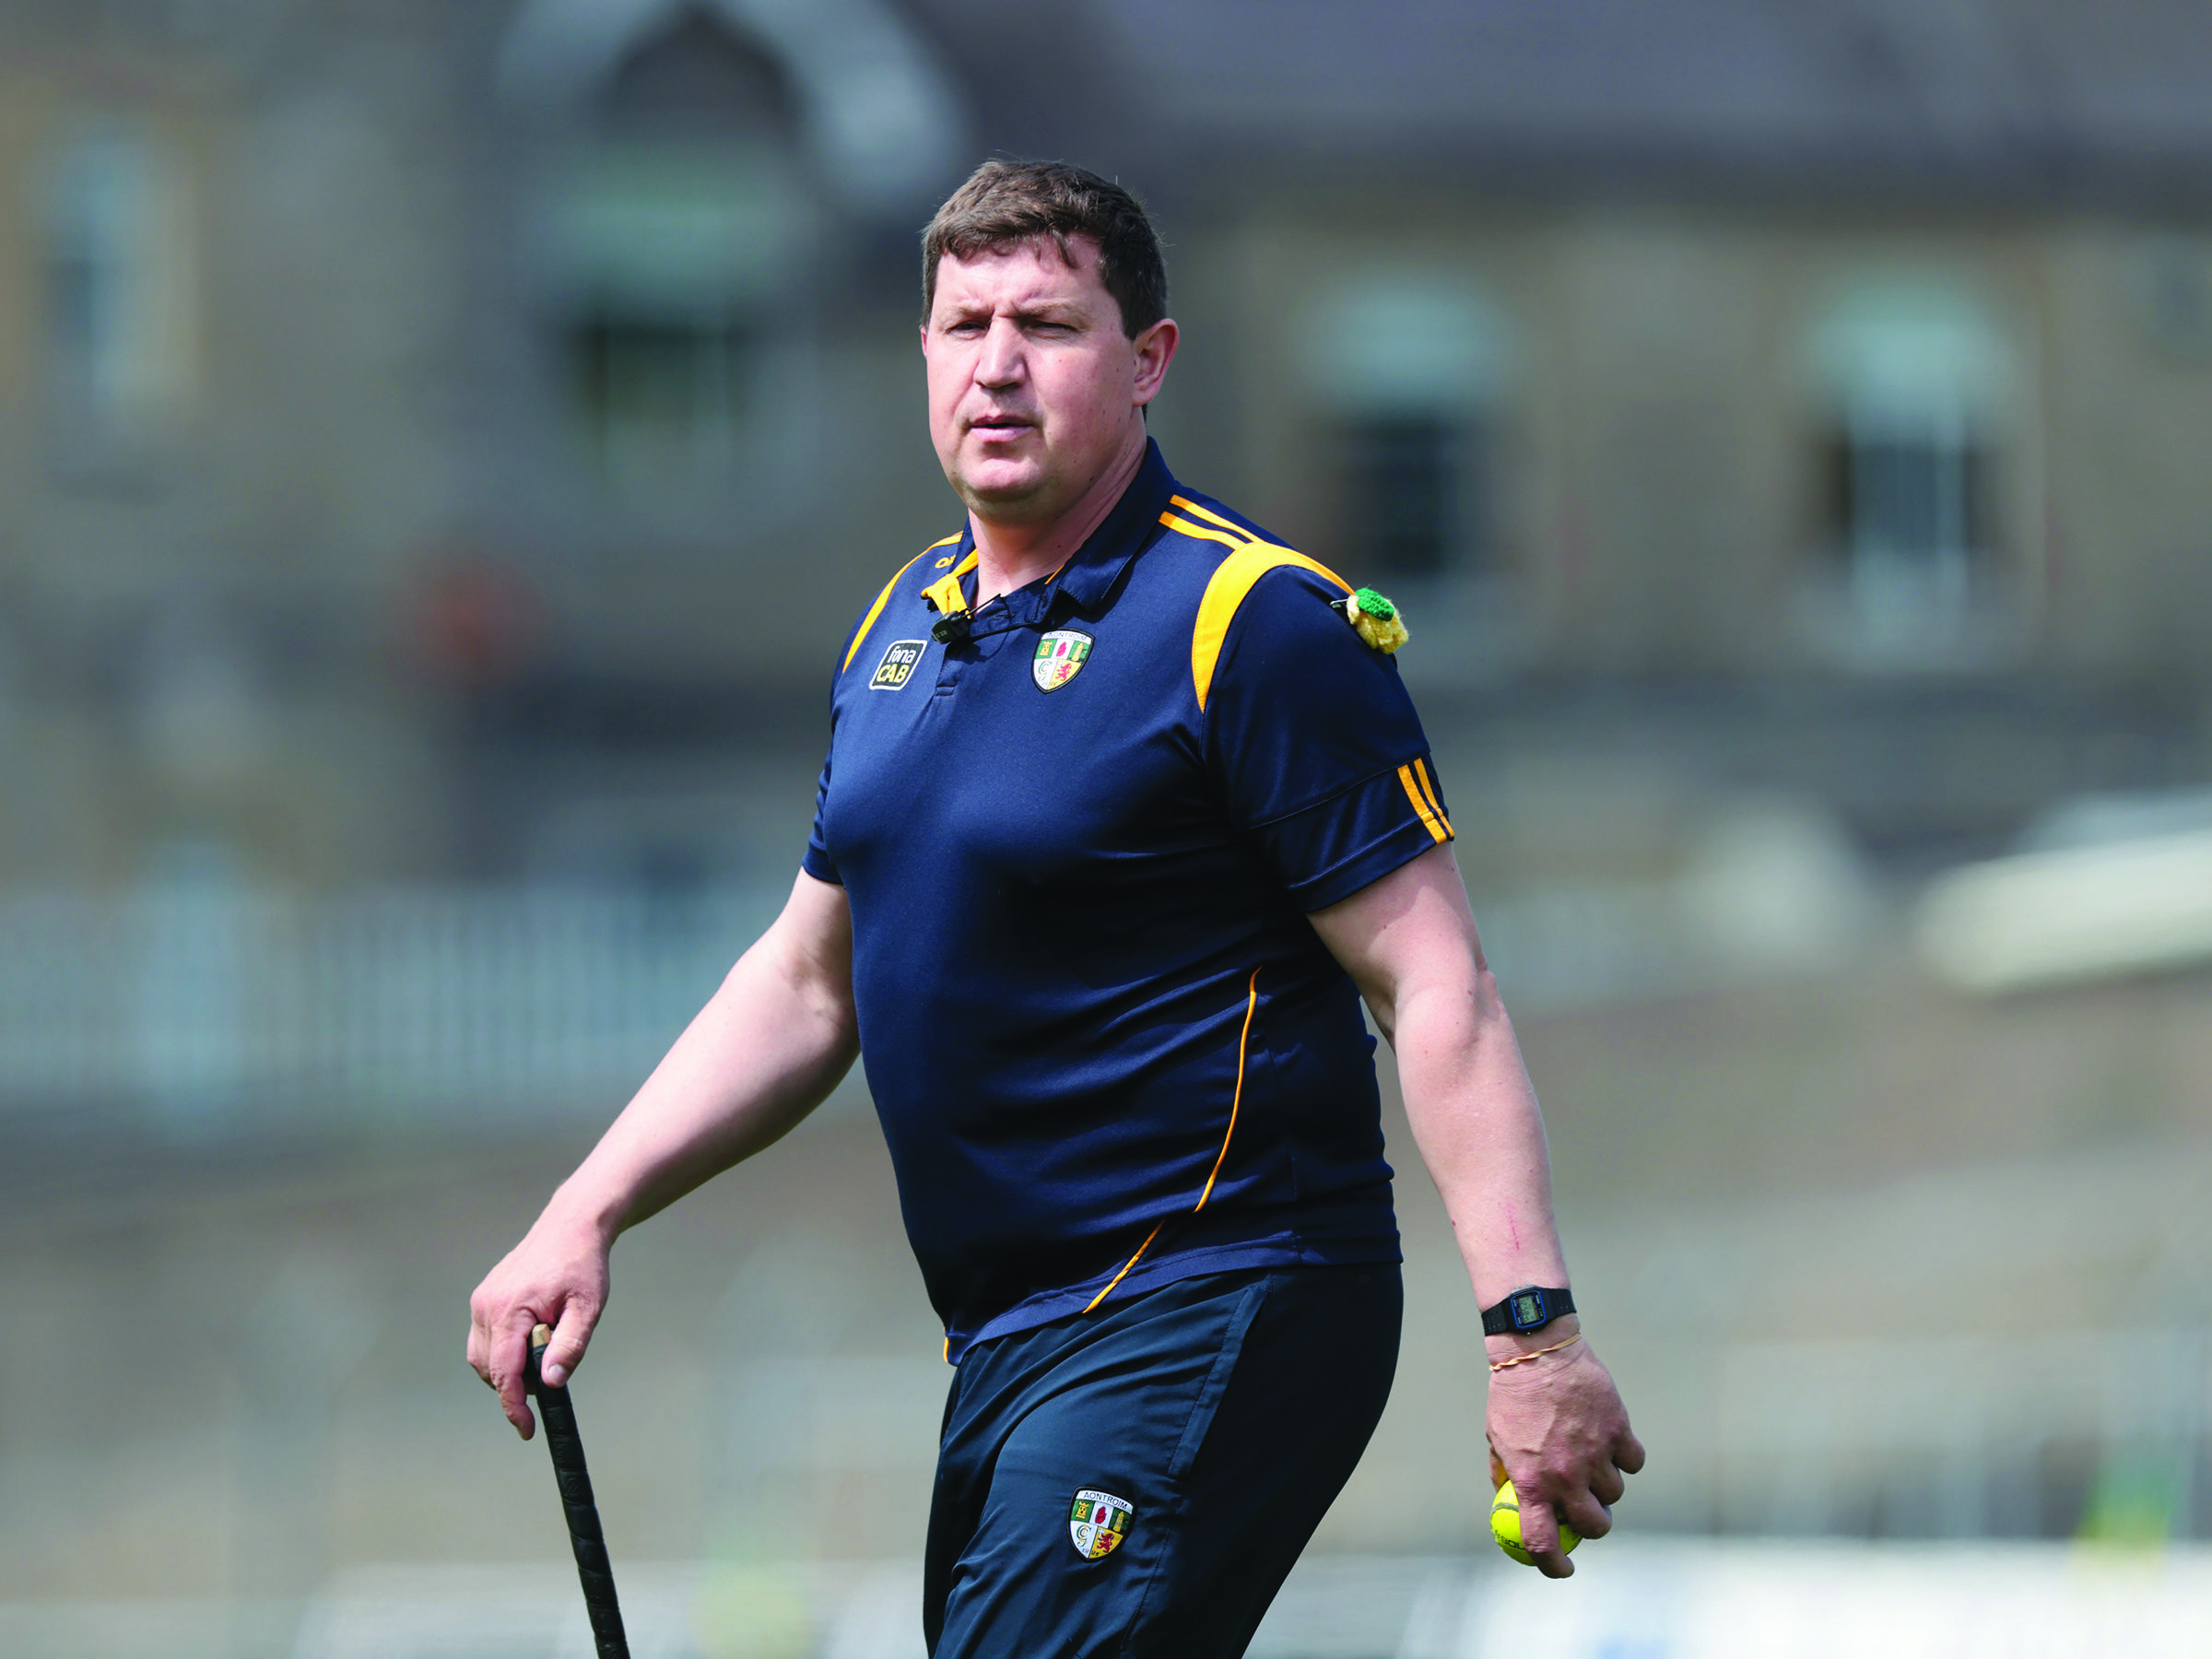 Despite already being through to the Joe McDonagh Cup final, Antrim manager Darren Gleeson insists there will be no slacking off against Kerry on Saturday